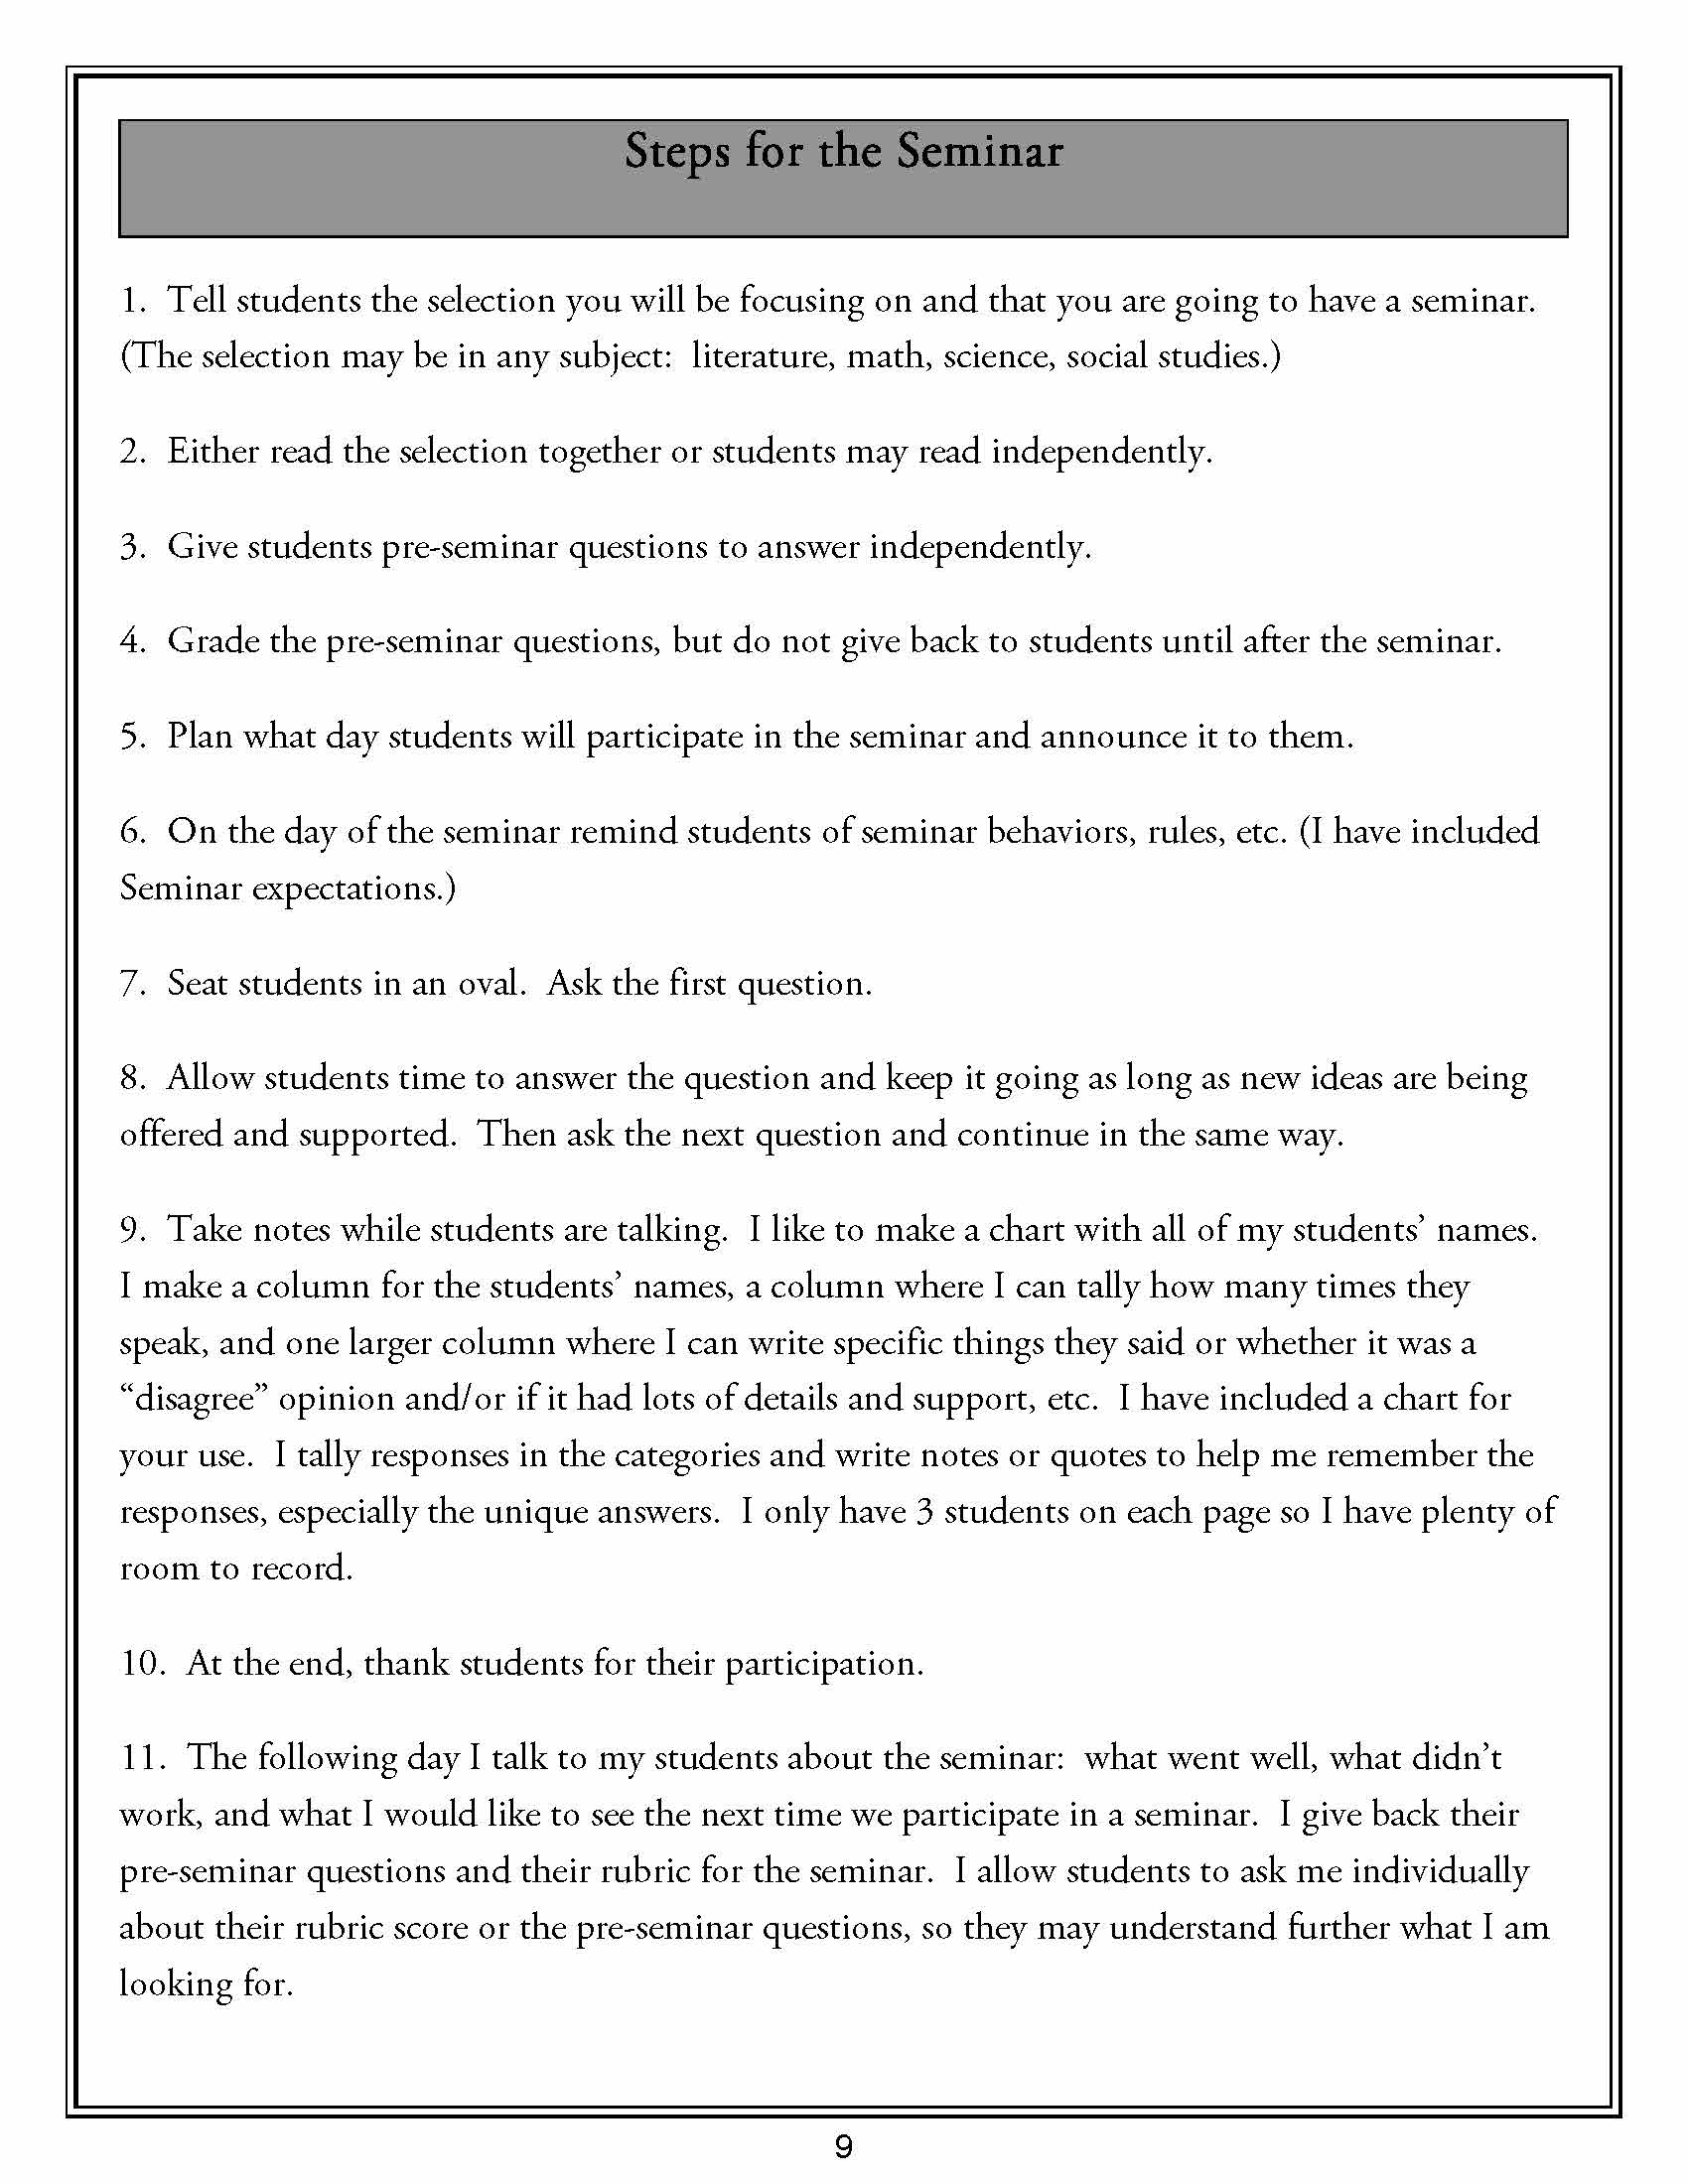 Critical Thinking Application Paper - Words | Essay Example